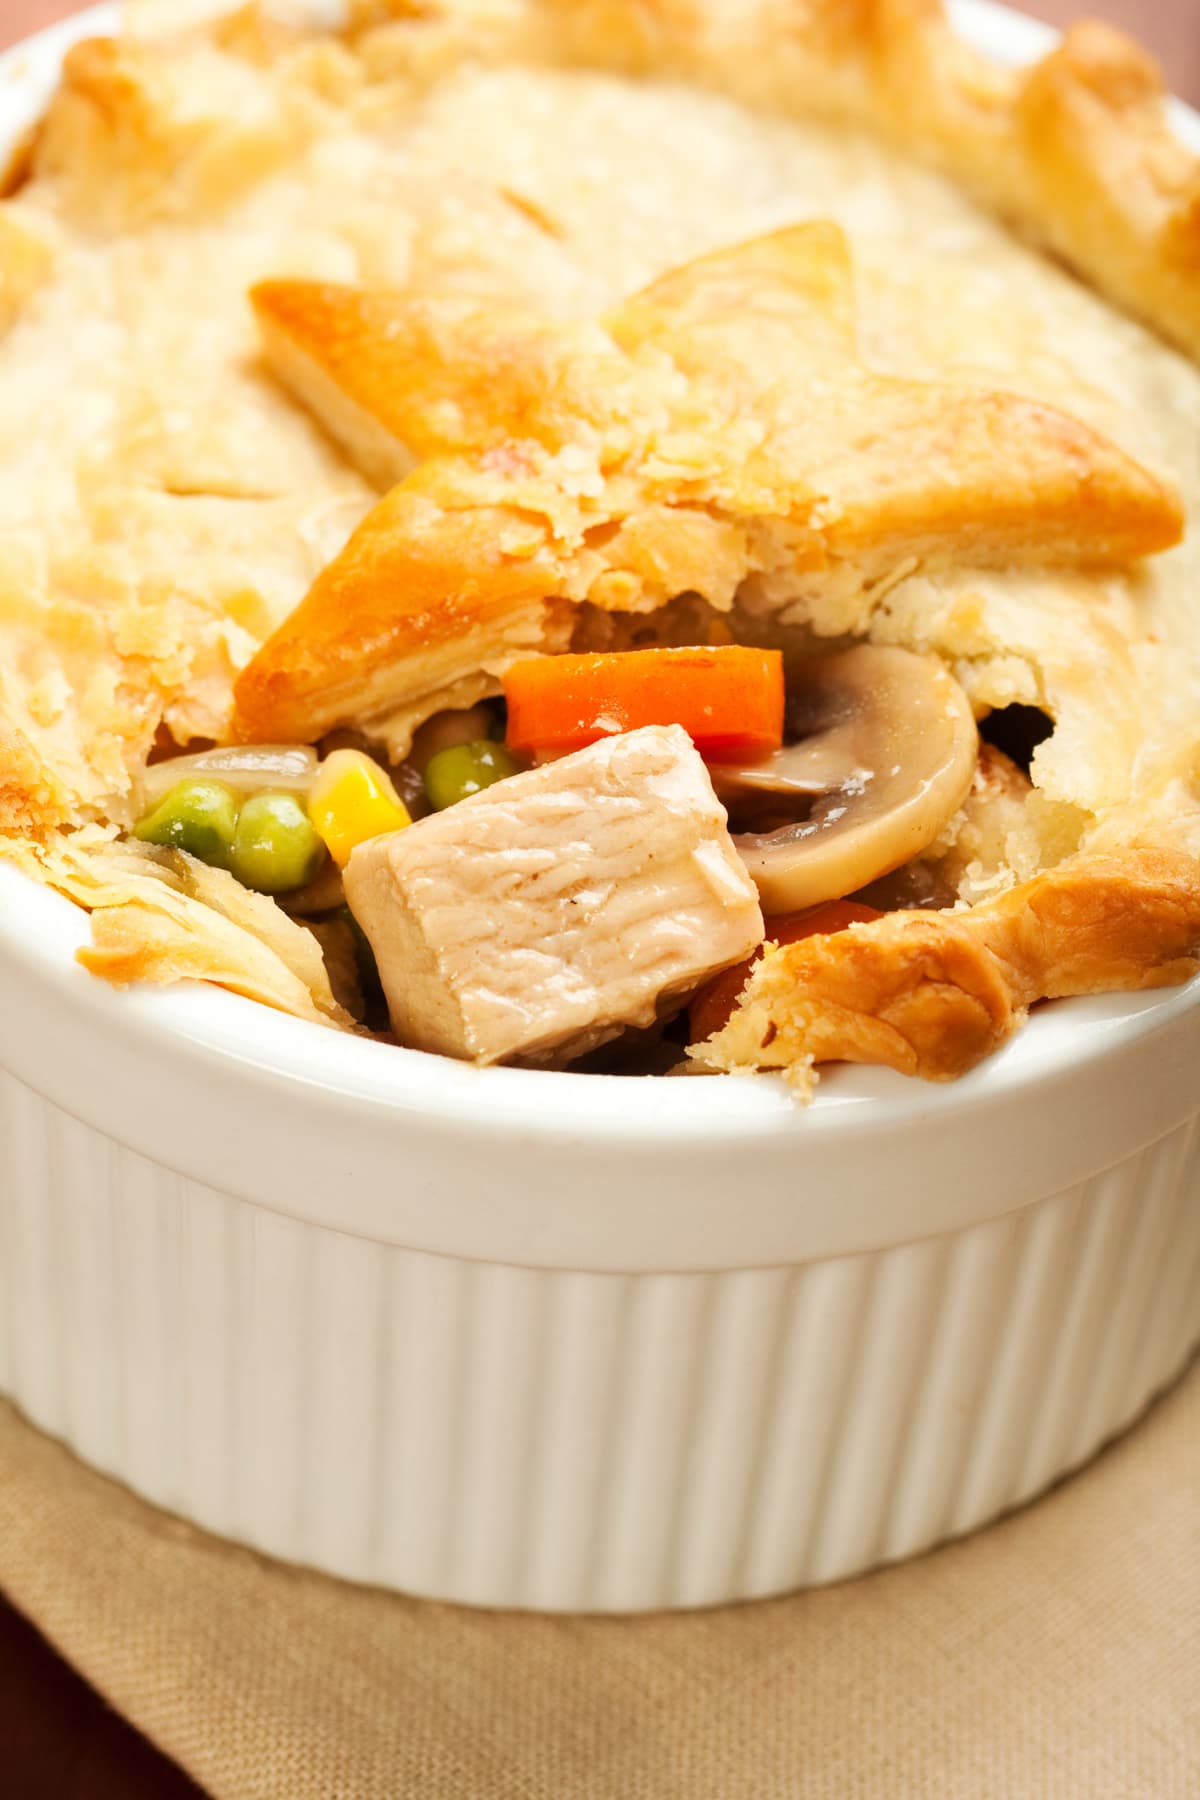 Chicken pot pie decorated with a pastry star